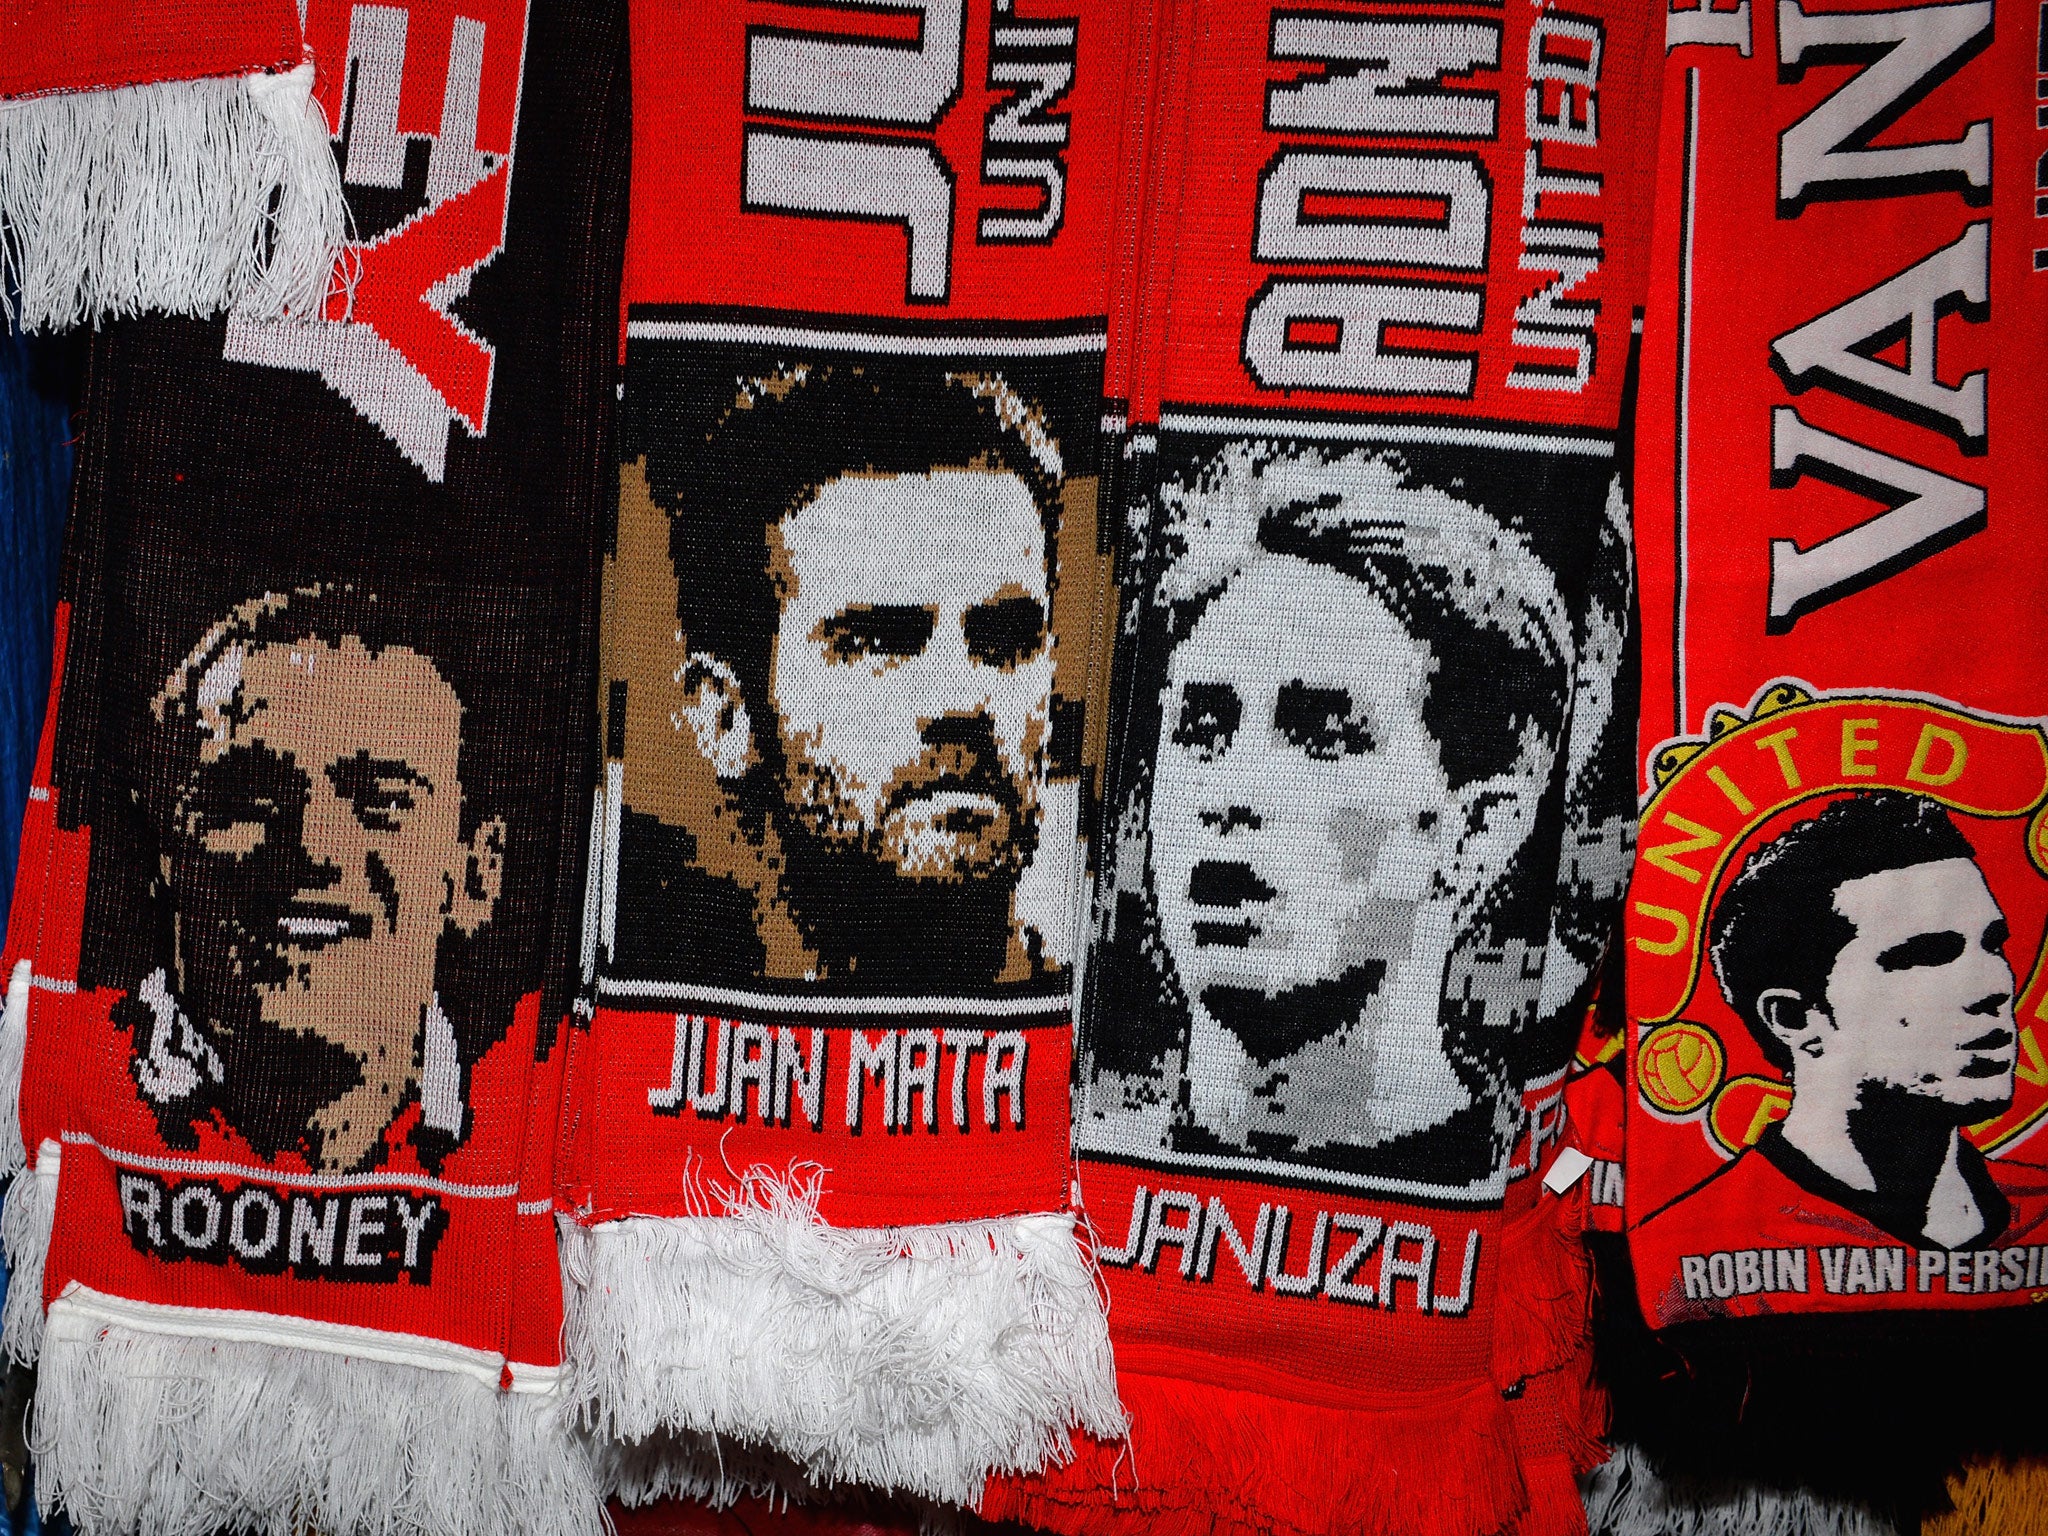 Juan Mata scarves are being sold outside Old Trafford